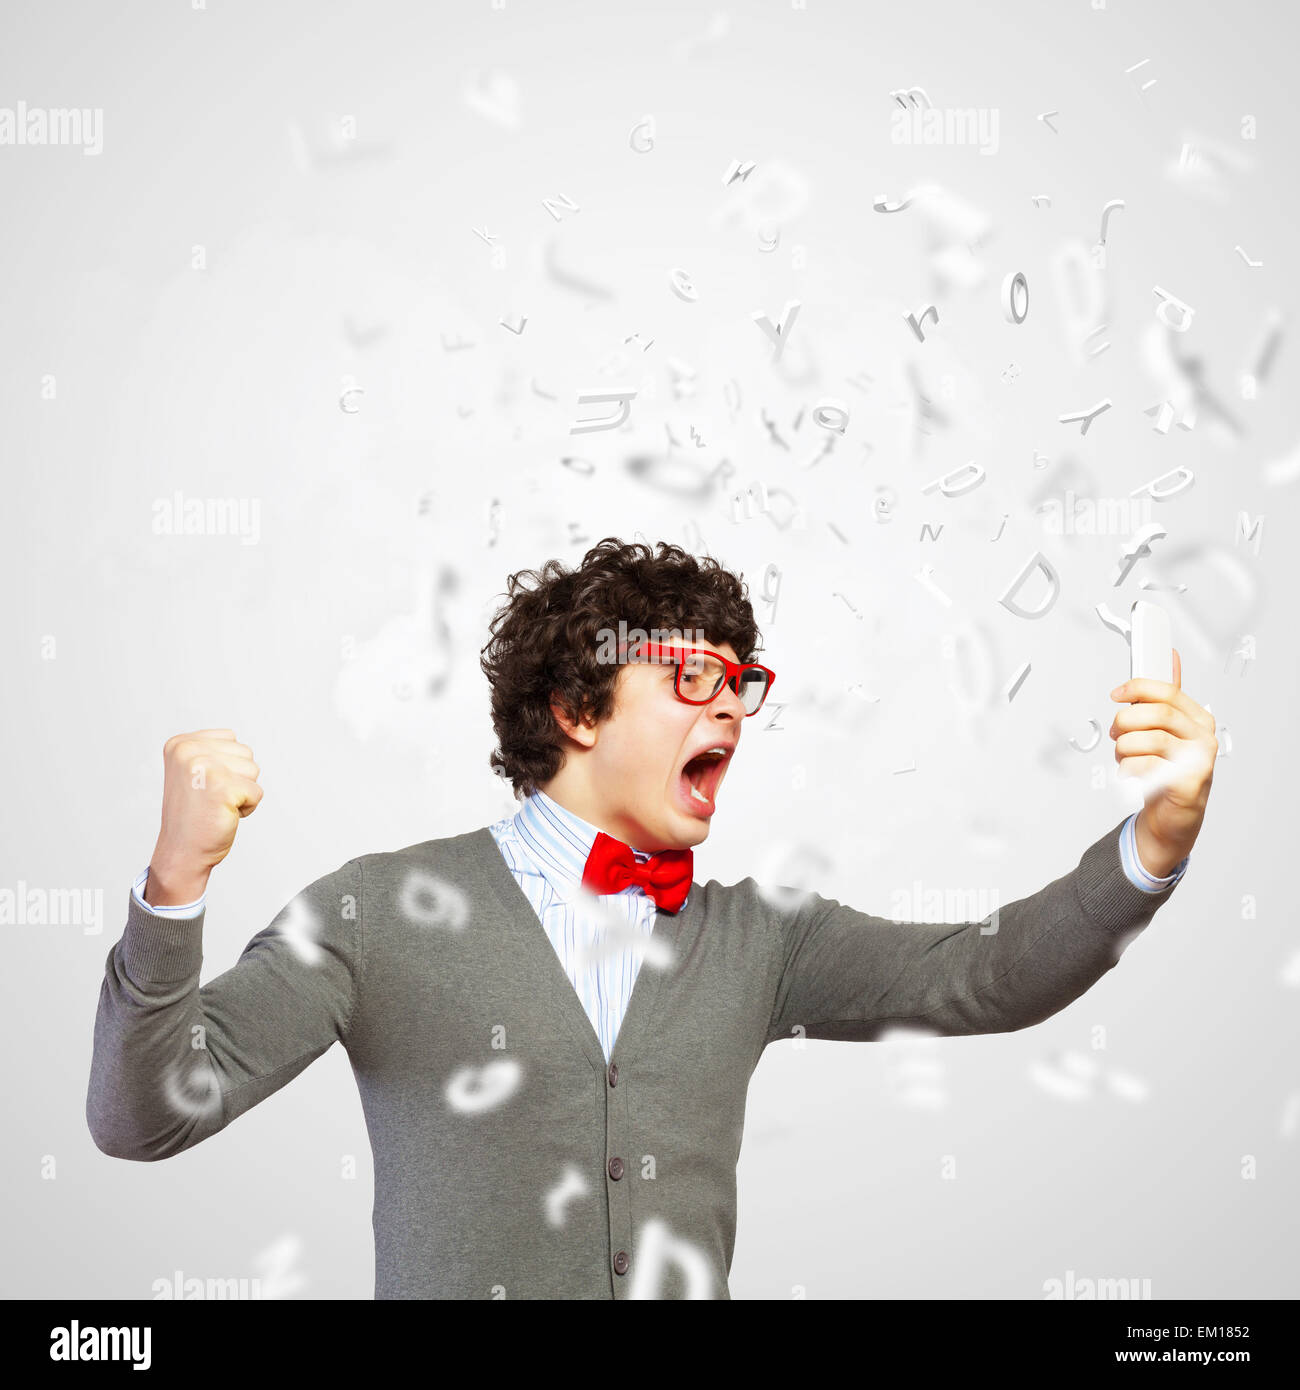 Young man shouting at his mobile phone Stock Photo